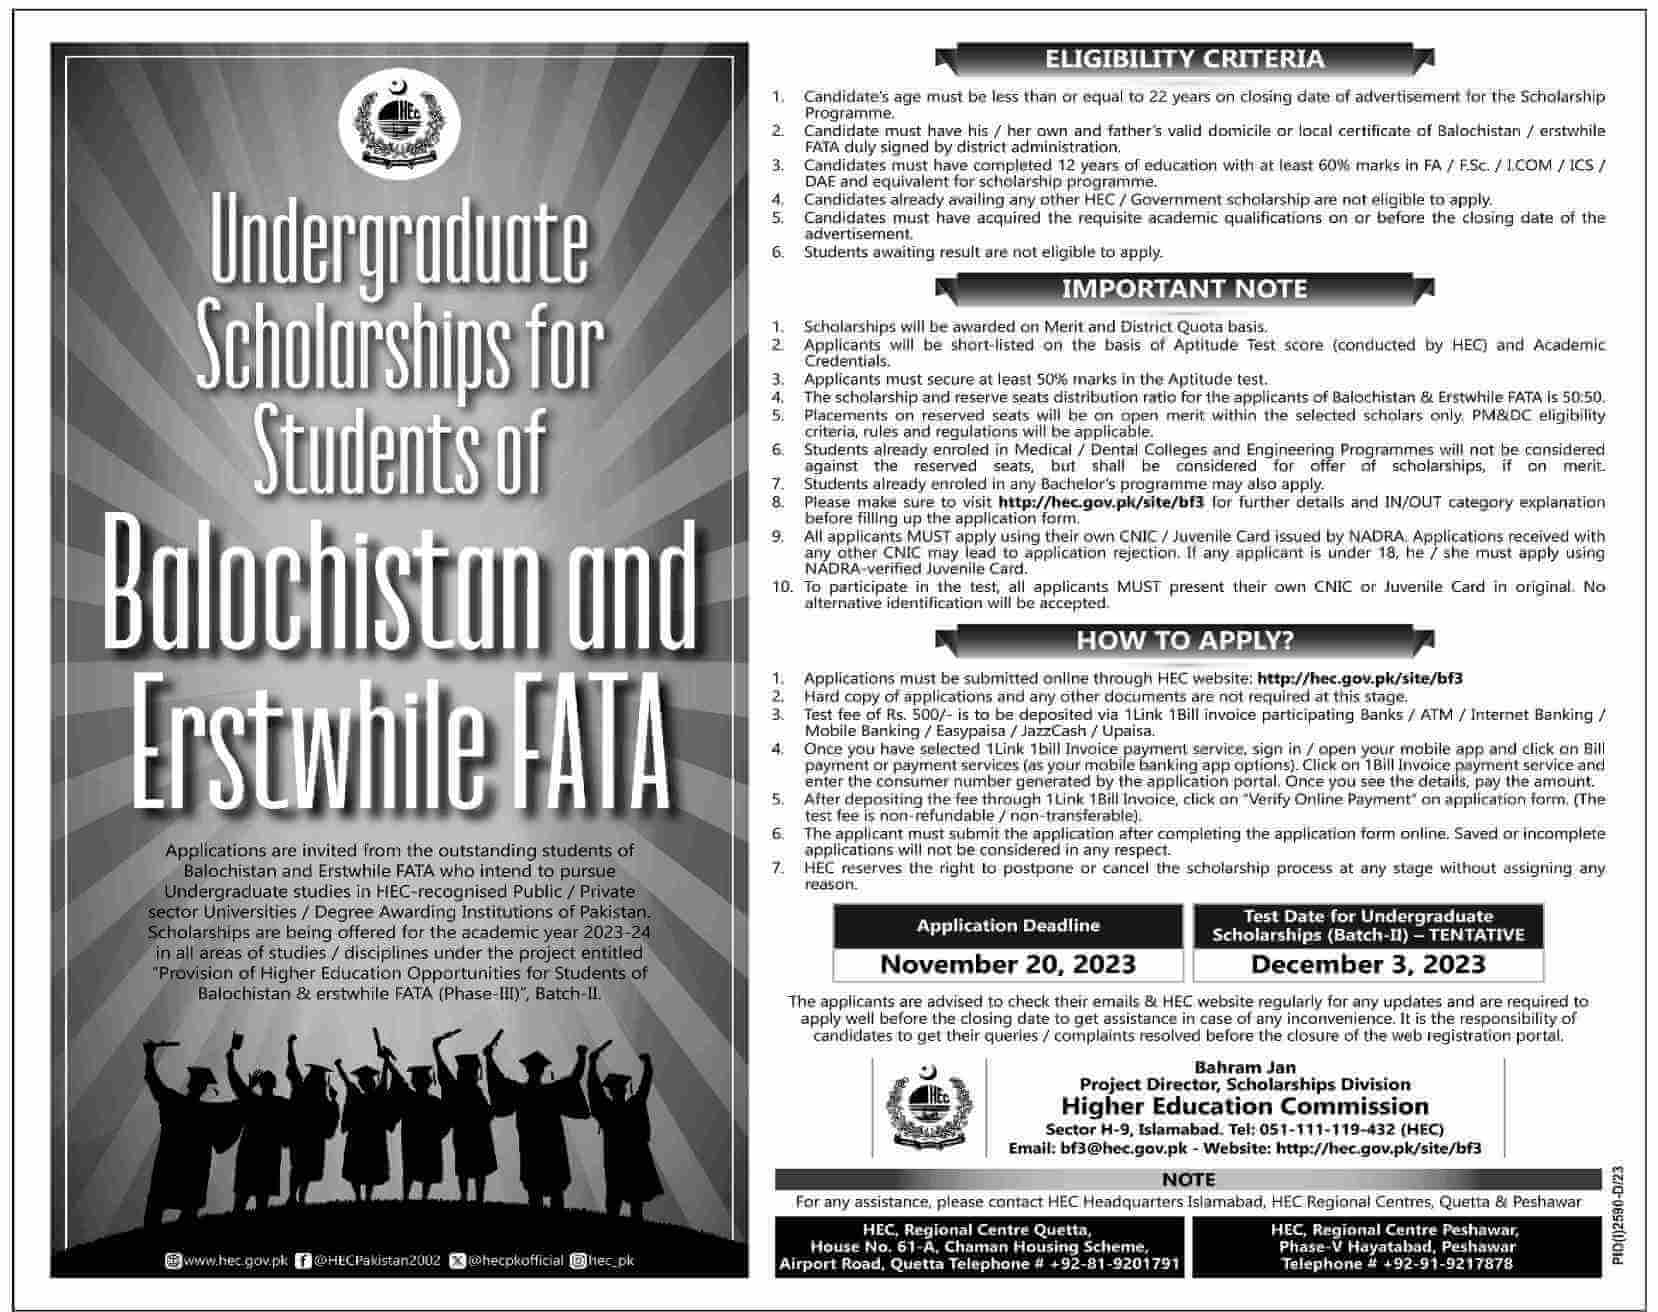 Hec Undergraduate Scholarships For Balochistan And Erstwhile Fata